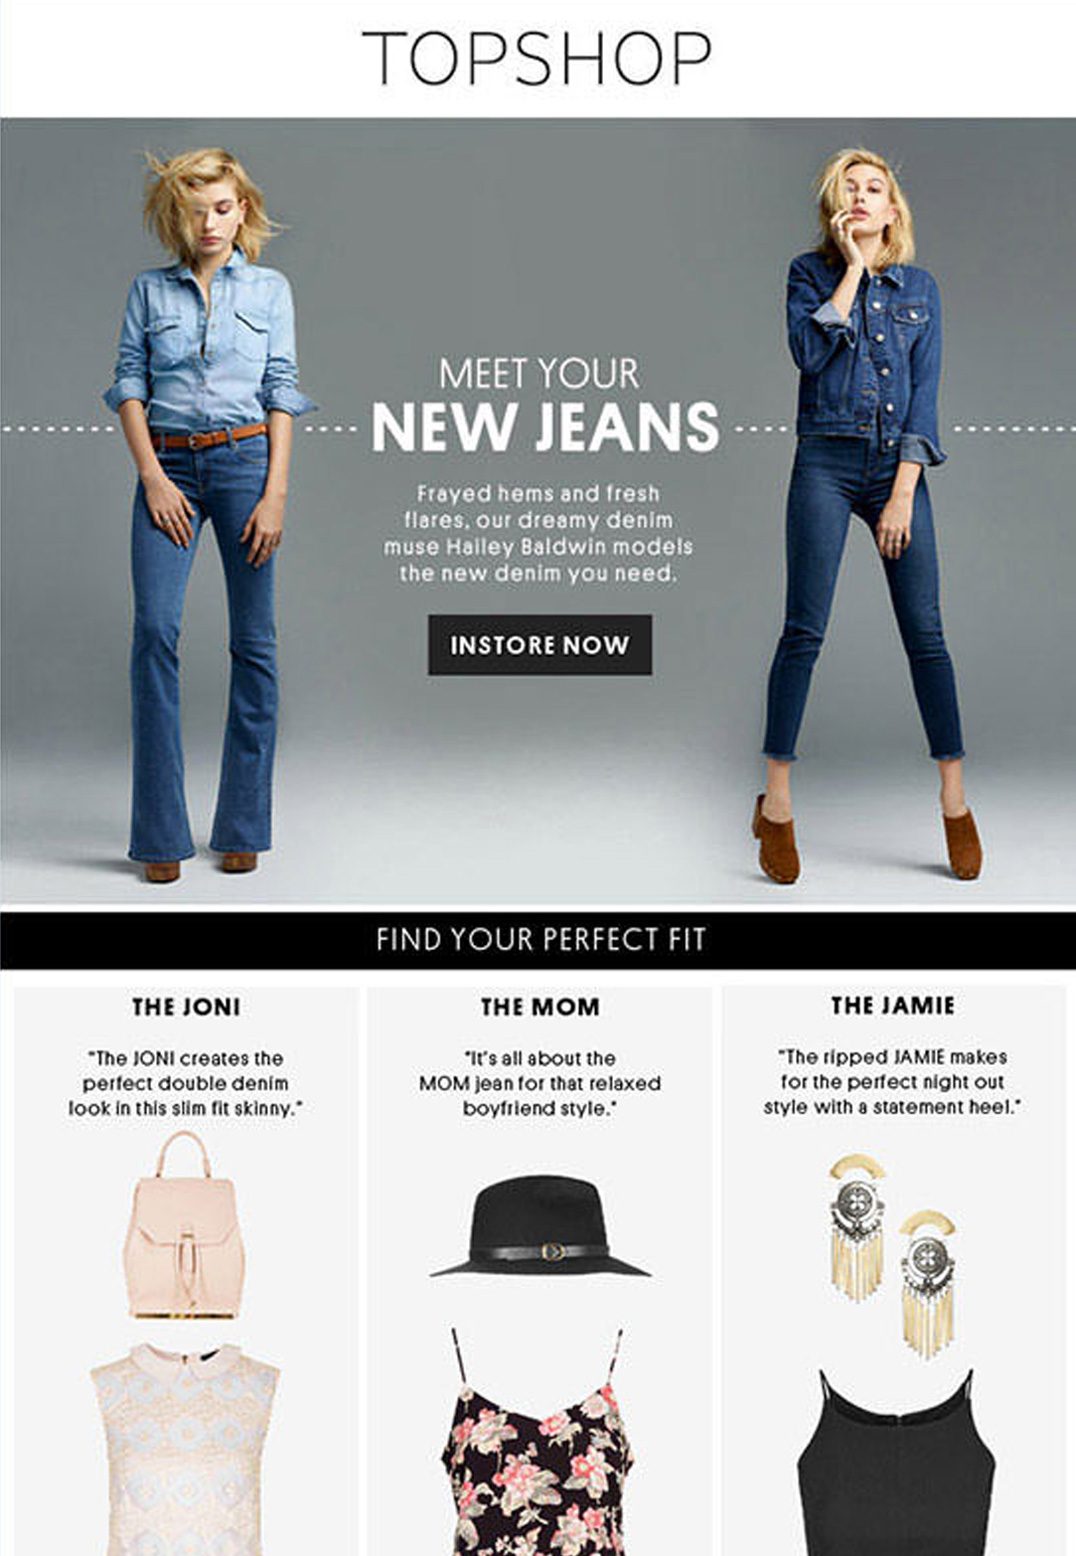 One of our favorite Strategies for Selling More Online is to link a landing page directly in an email, like Topshop does